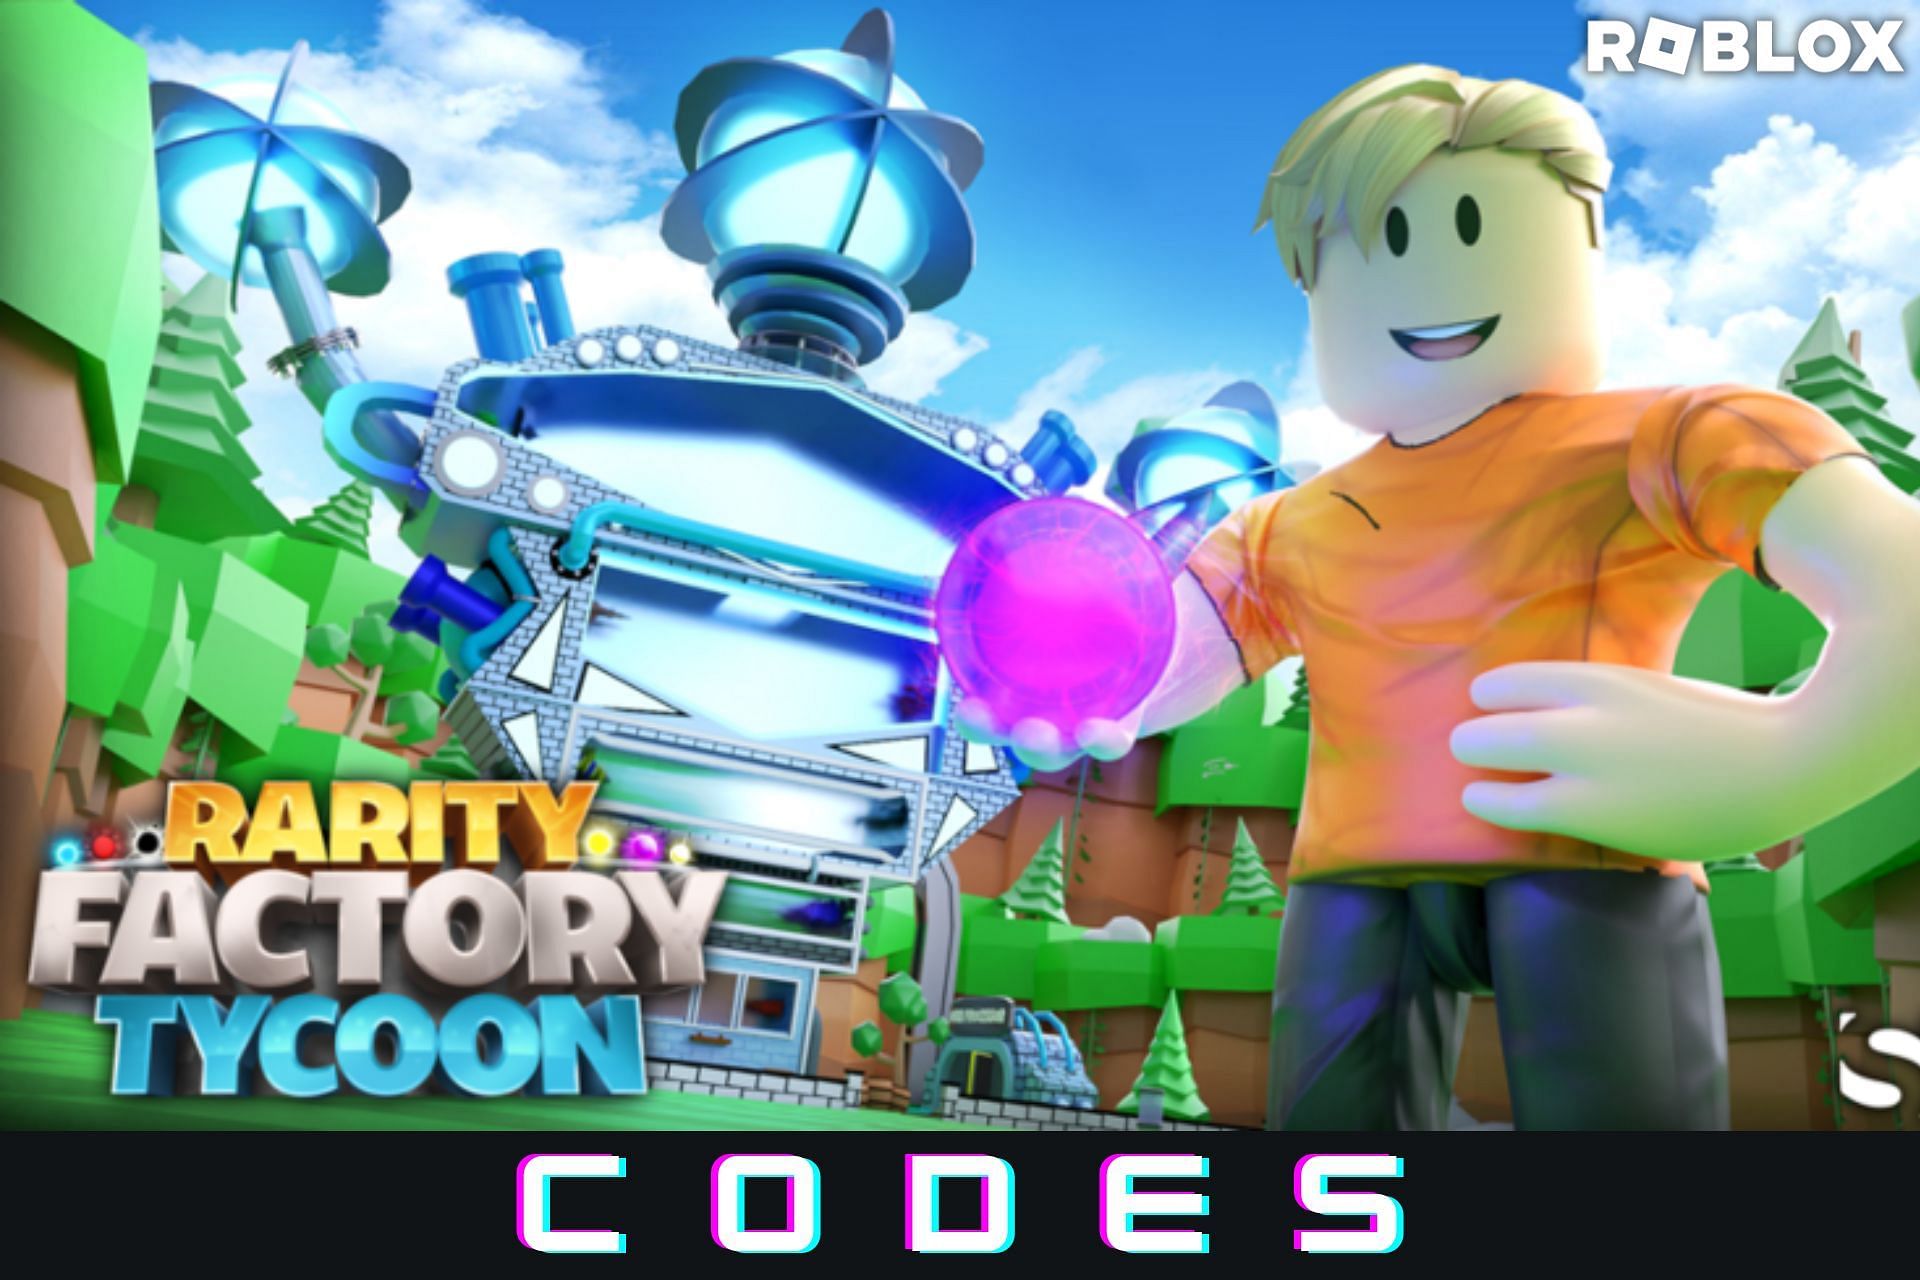 Roblox Rarity Factory Tycoon codes for January 2023: Free gifts